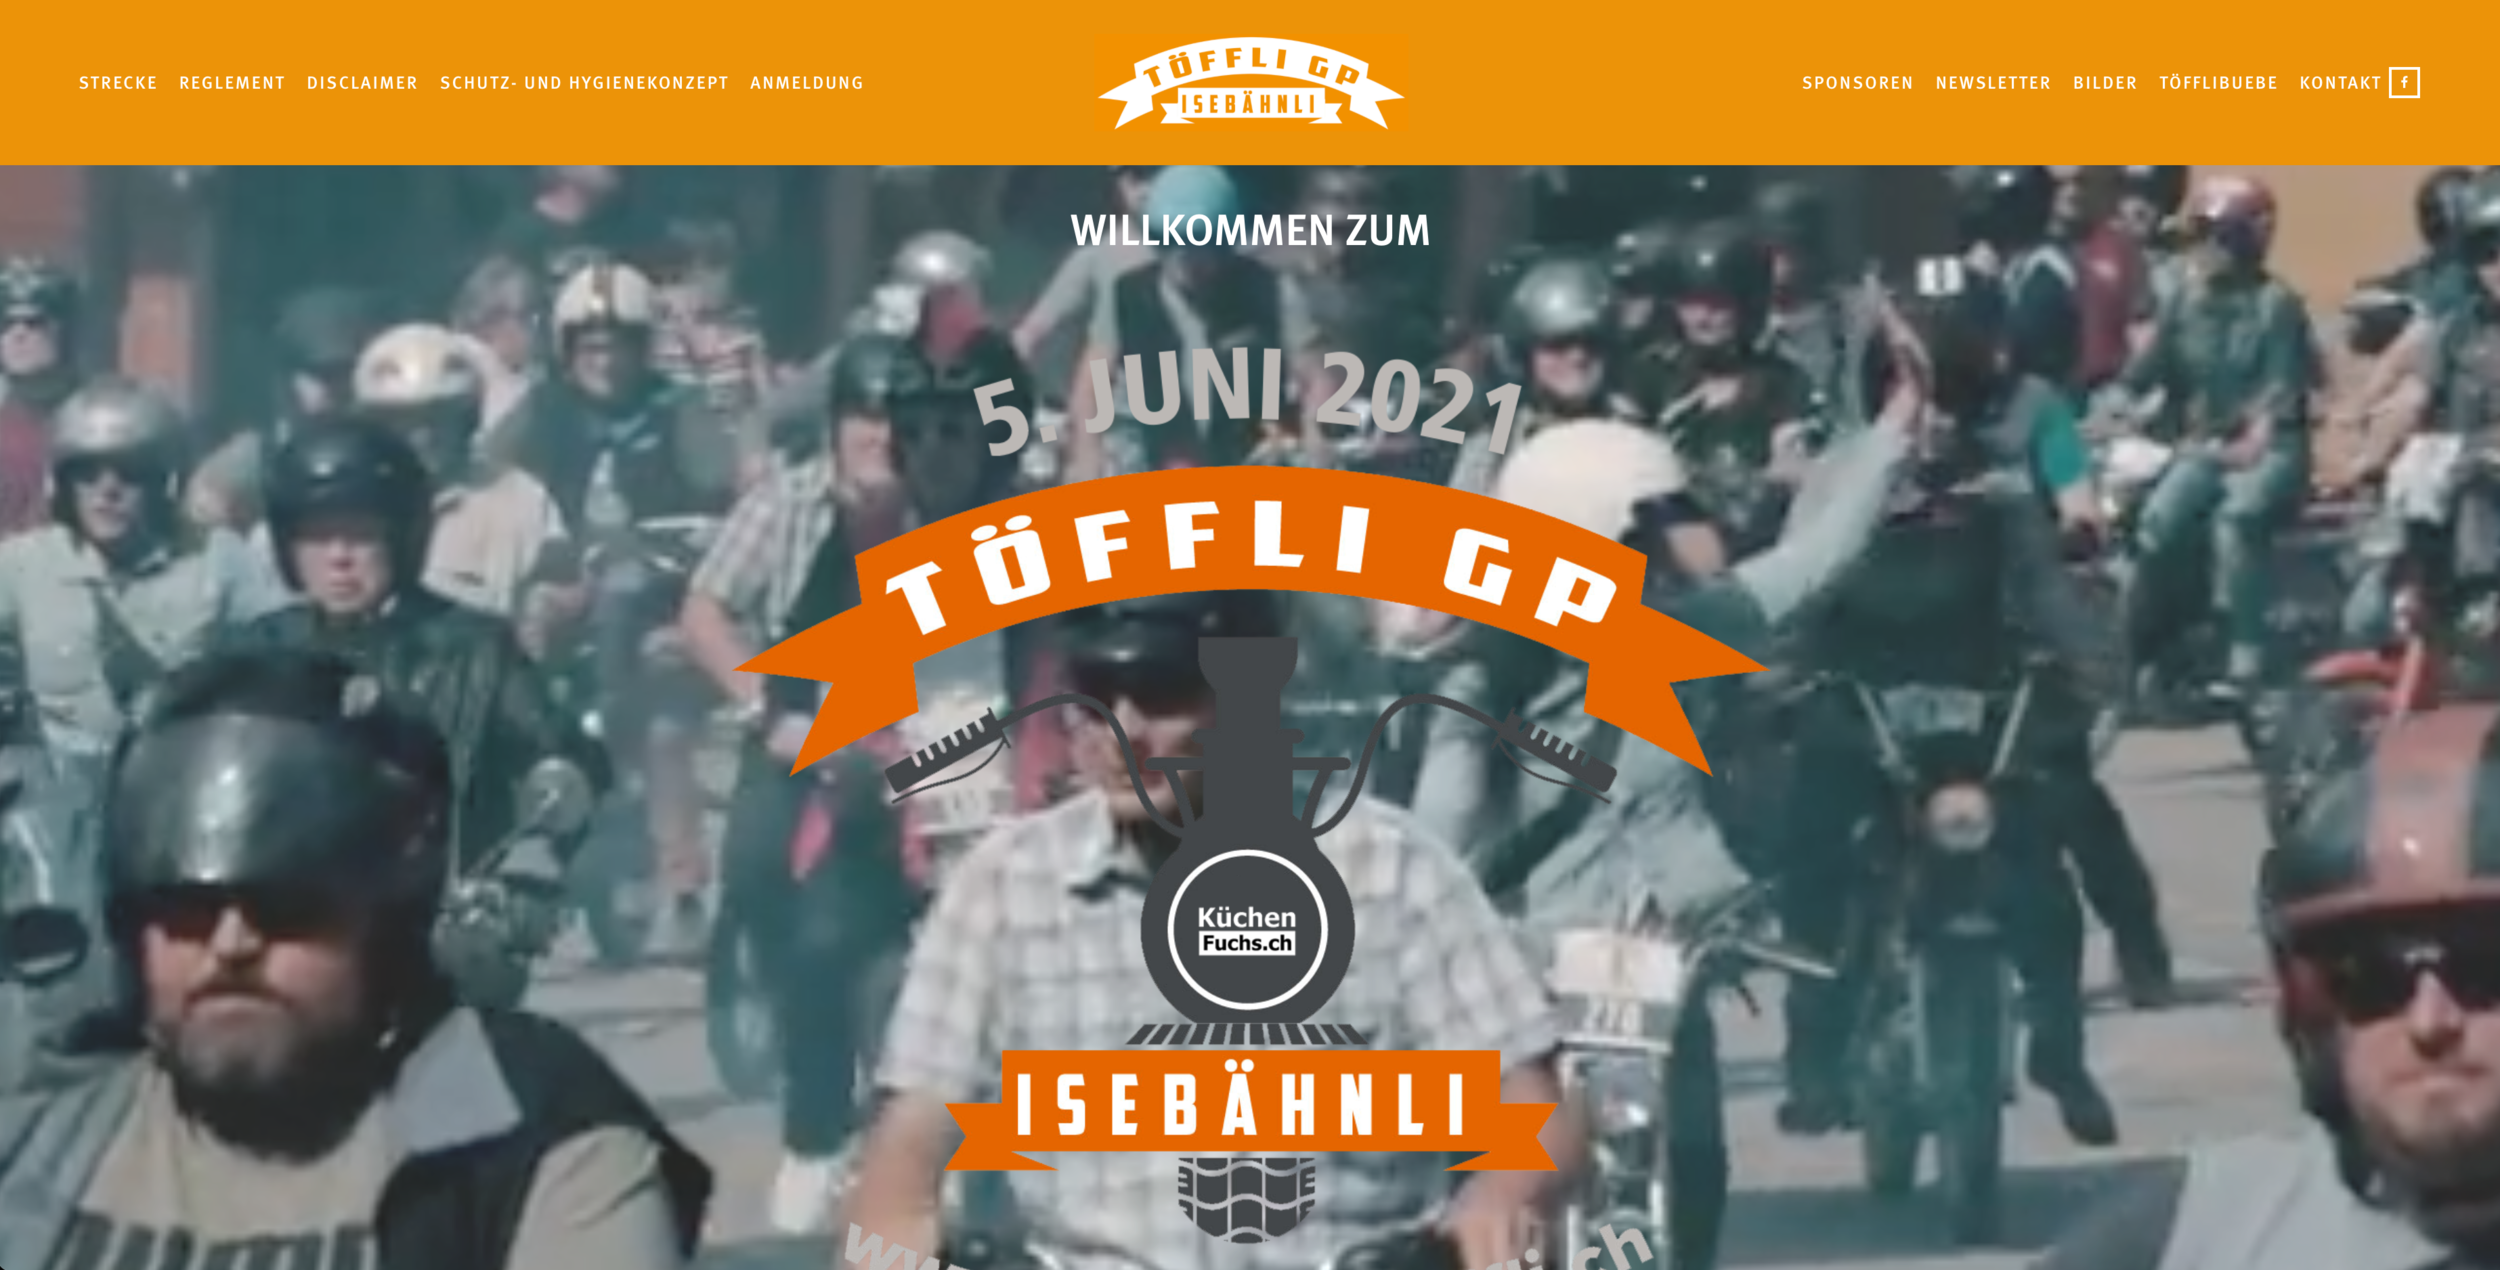 Website made by JPR Media GmbH_02.png